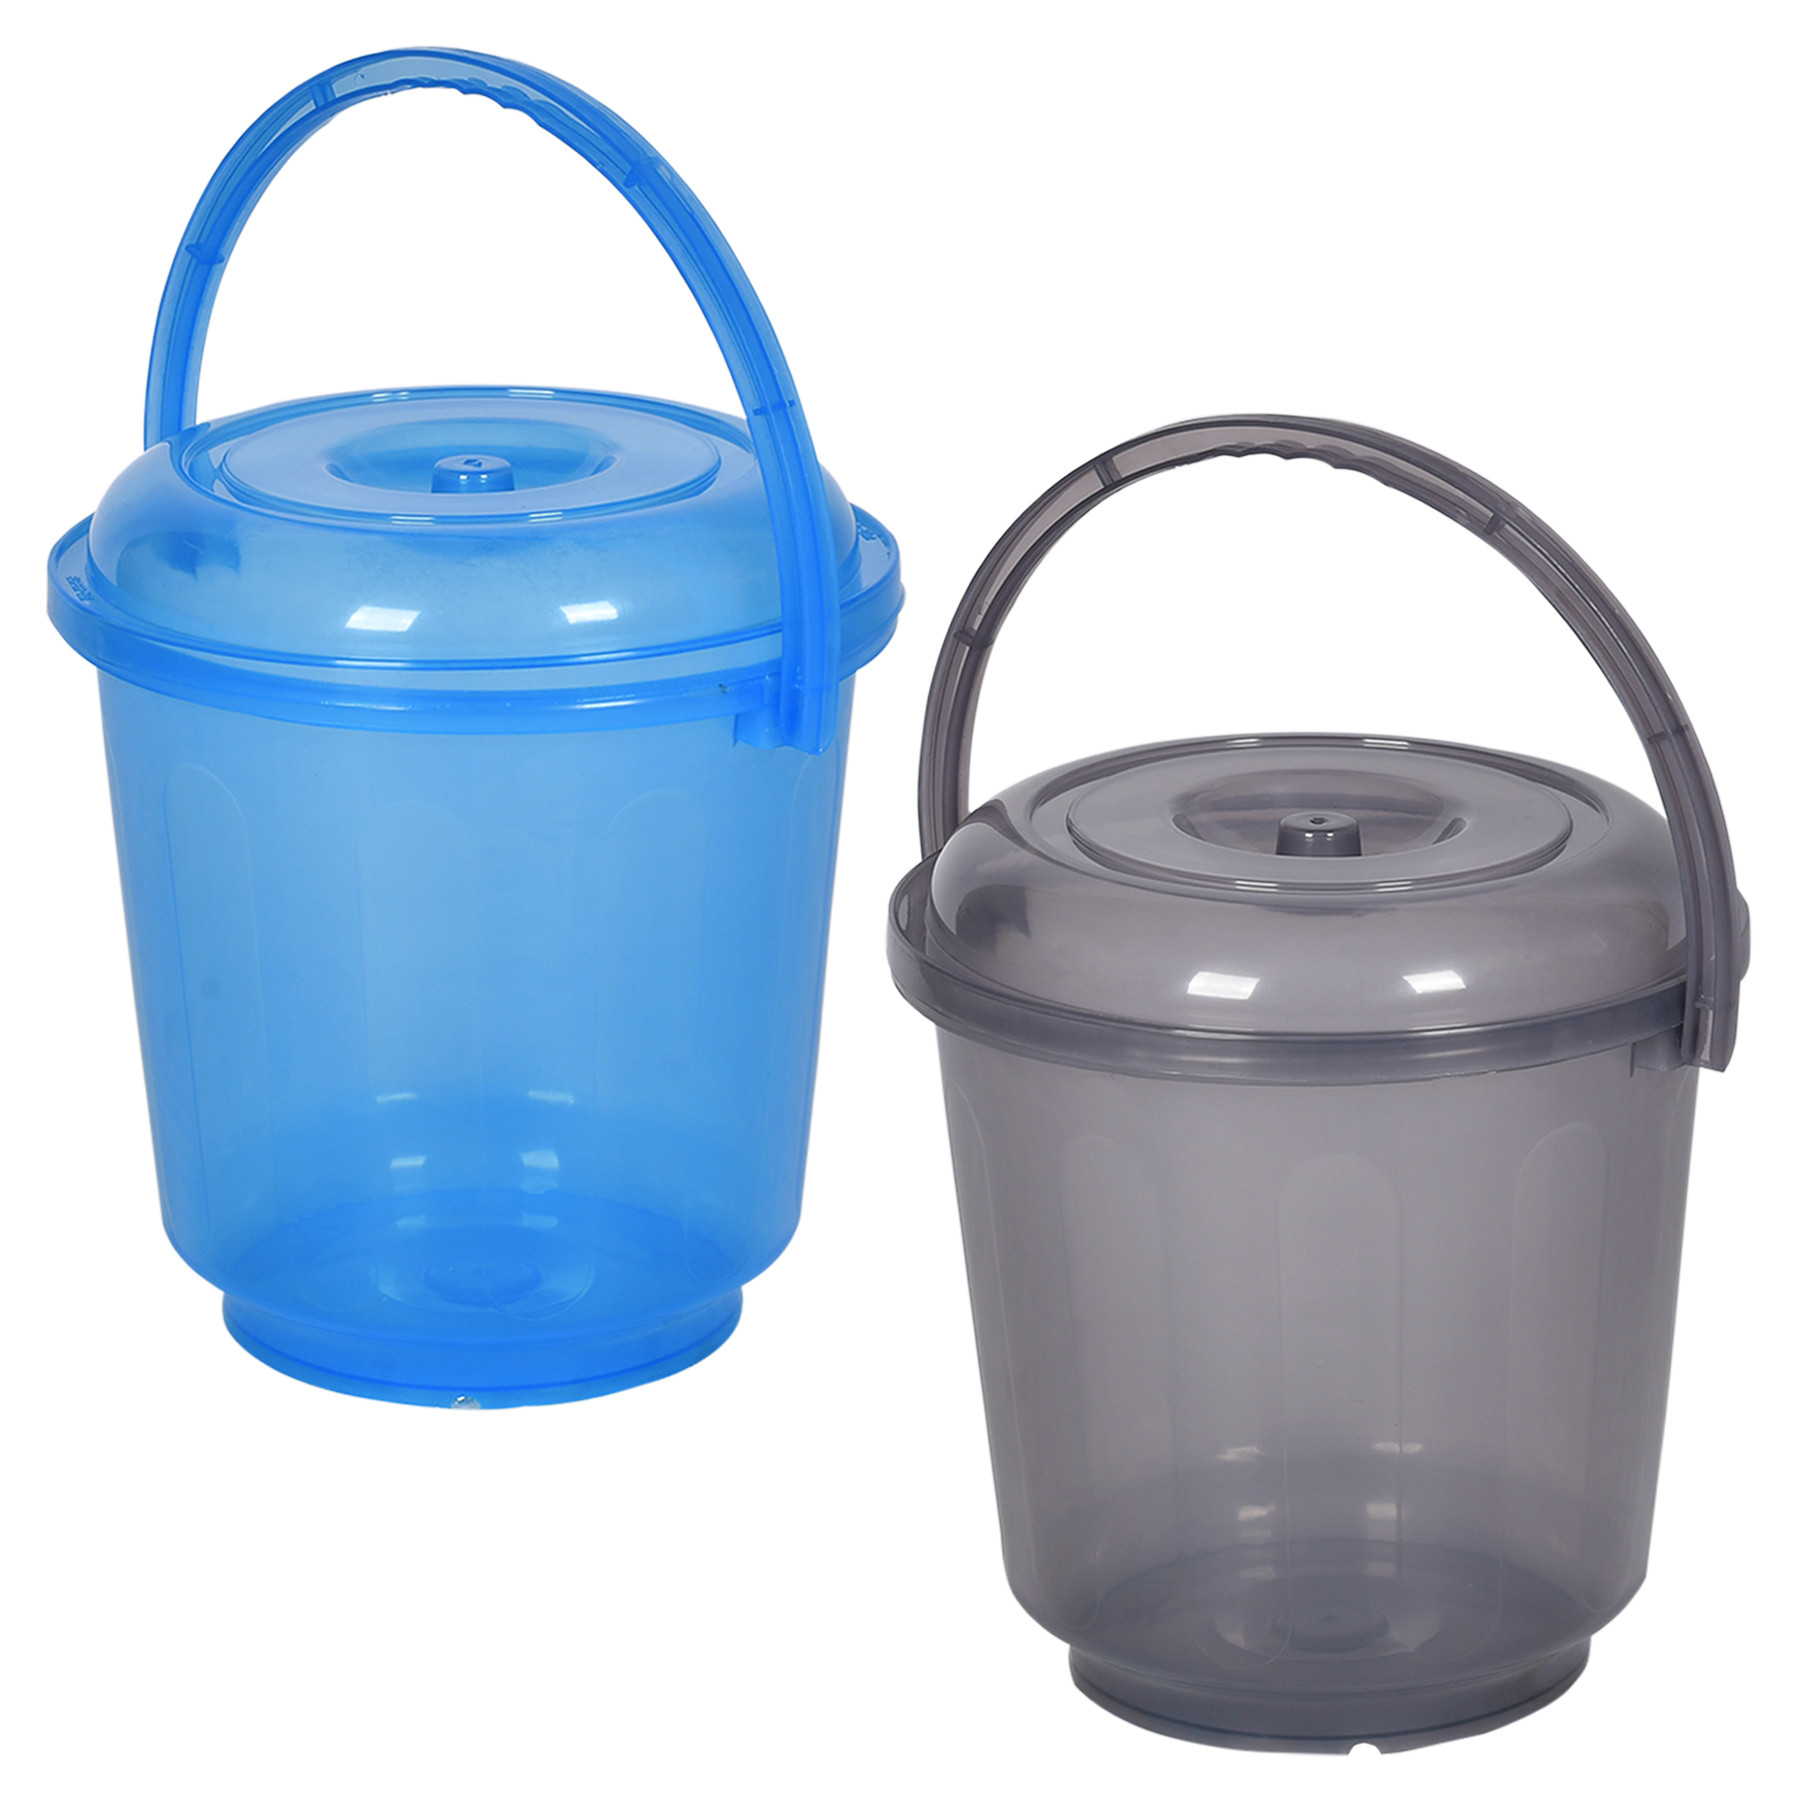 Kuber Industries Bucket | Bathroom Bucket | Utility Bucket for Daily Use | Water Storage Bucket | Bathing Bucket with Handle & Lid | 13 LTR | SUPER-013 | Transparent | Blue & Gray